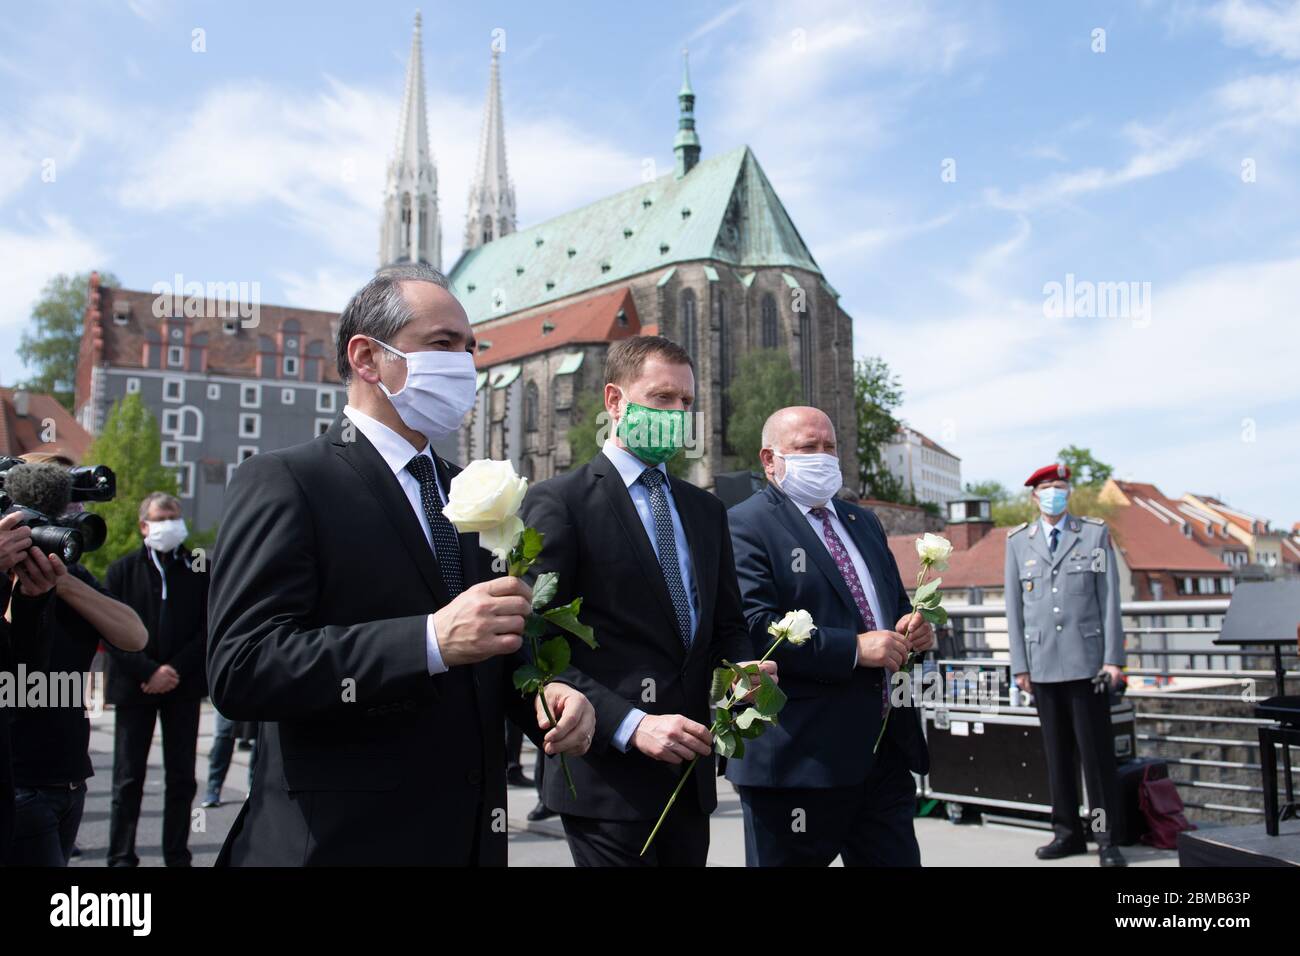 08 May 2020, Saxony, Görlitz: Octavian Ursu (CDU, l-r), Lord Mayor of Görlitz, Michael Kretschmer (CDU), Prime Minister of Saxony, and Siegfried Deinege (non-partisan), former Lord Mayor of Görlitz, hold during a memorial service on the Old Town Bridge in front of St. Peter's Church white roses. They wear masks against the novel coronavirus. On 8 May is the 75th anniversary of the end of the Second World War and the liberation from National Socialism. Photo: Sebastian Kahnert/dpa-Zentralbild/dpa Stock Photo